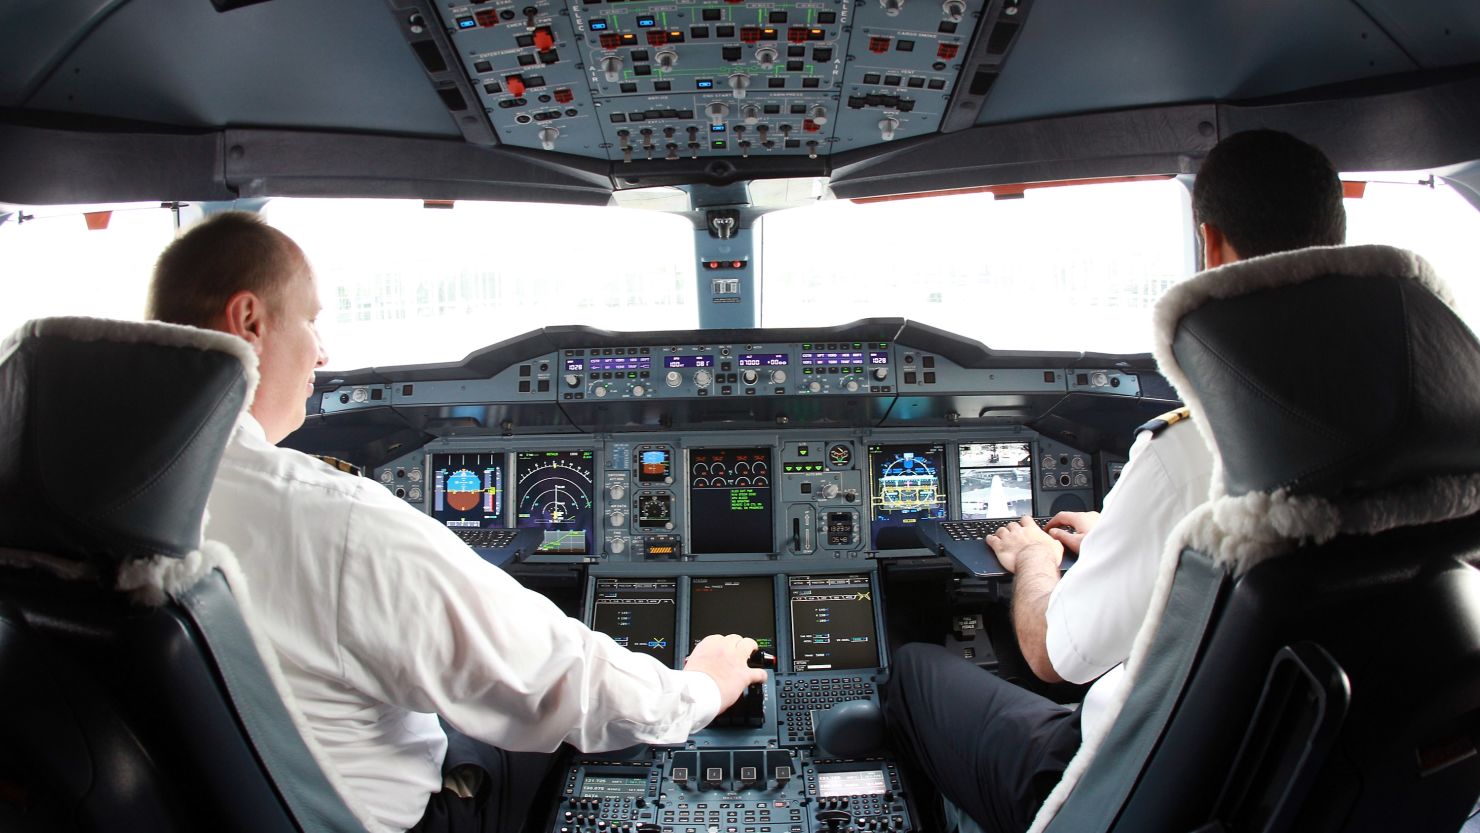 Some personal electronic devices can cause interference with pilot-to-ground communication..